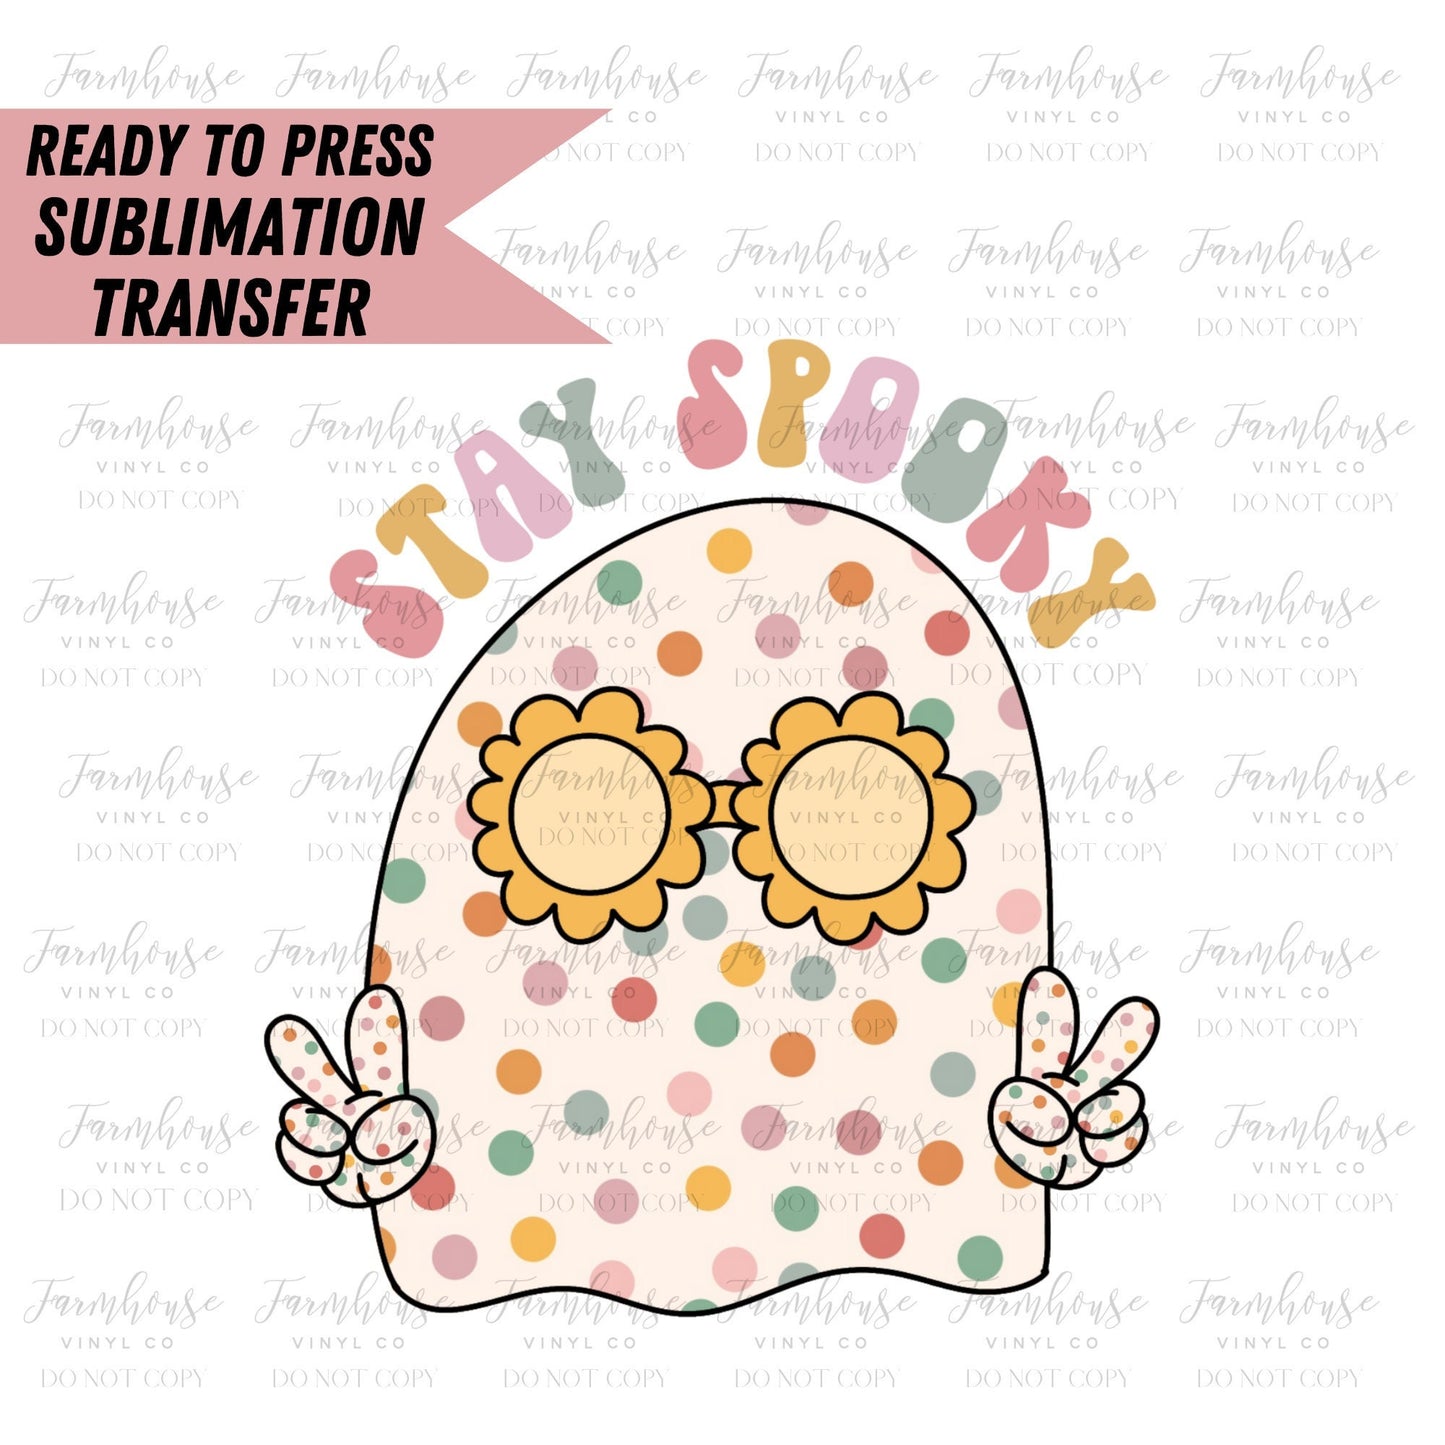 Stay Spooky Retro Ghost, Ready to Press Sublimation Transfer, Heat Transfer, Trending Graphic 22-23, Kids Halloween Design, Floral Fall